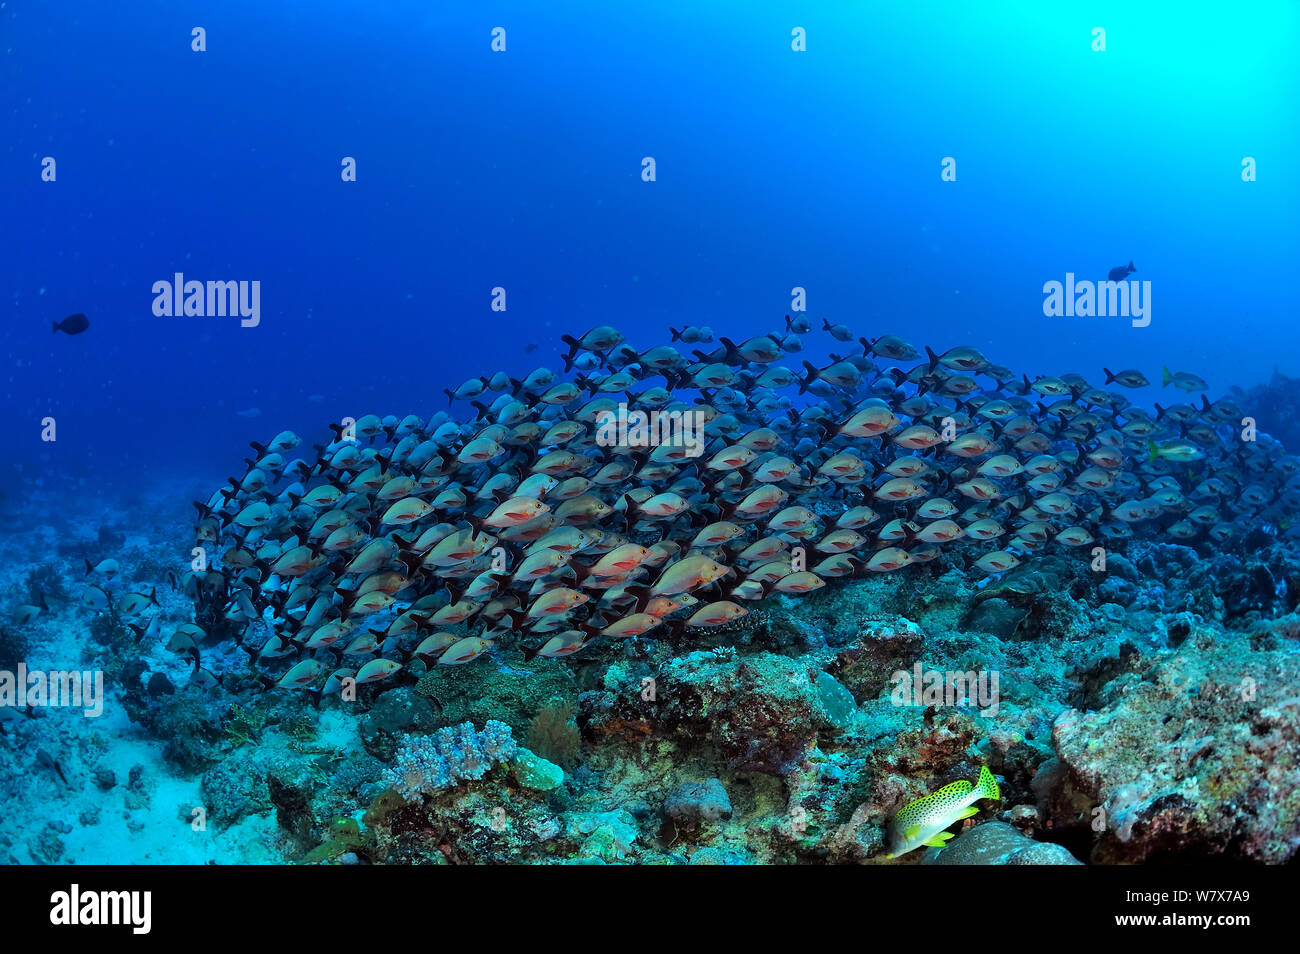 School of Humpback snappers (Lutjanus gibbus) on a coral reef,  Madagascar. Indian Ocean. Stock Photo